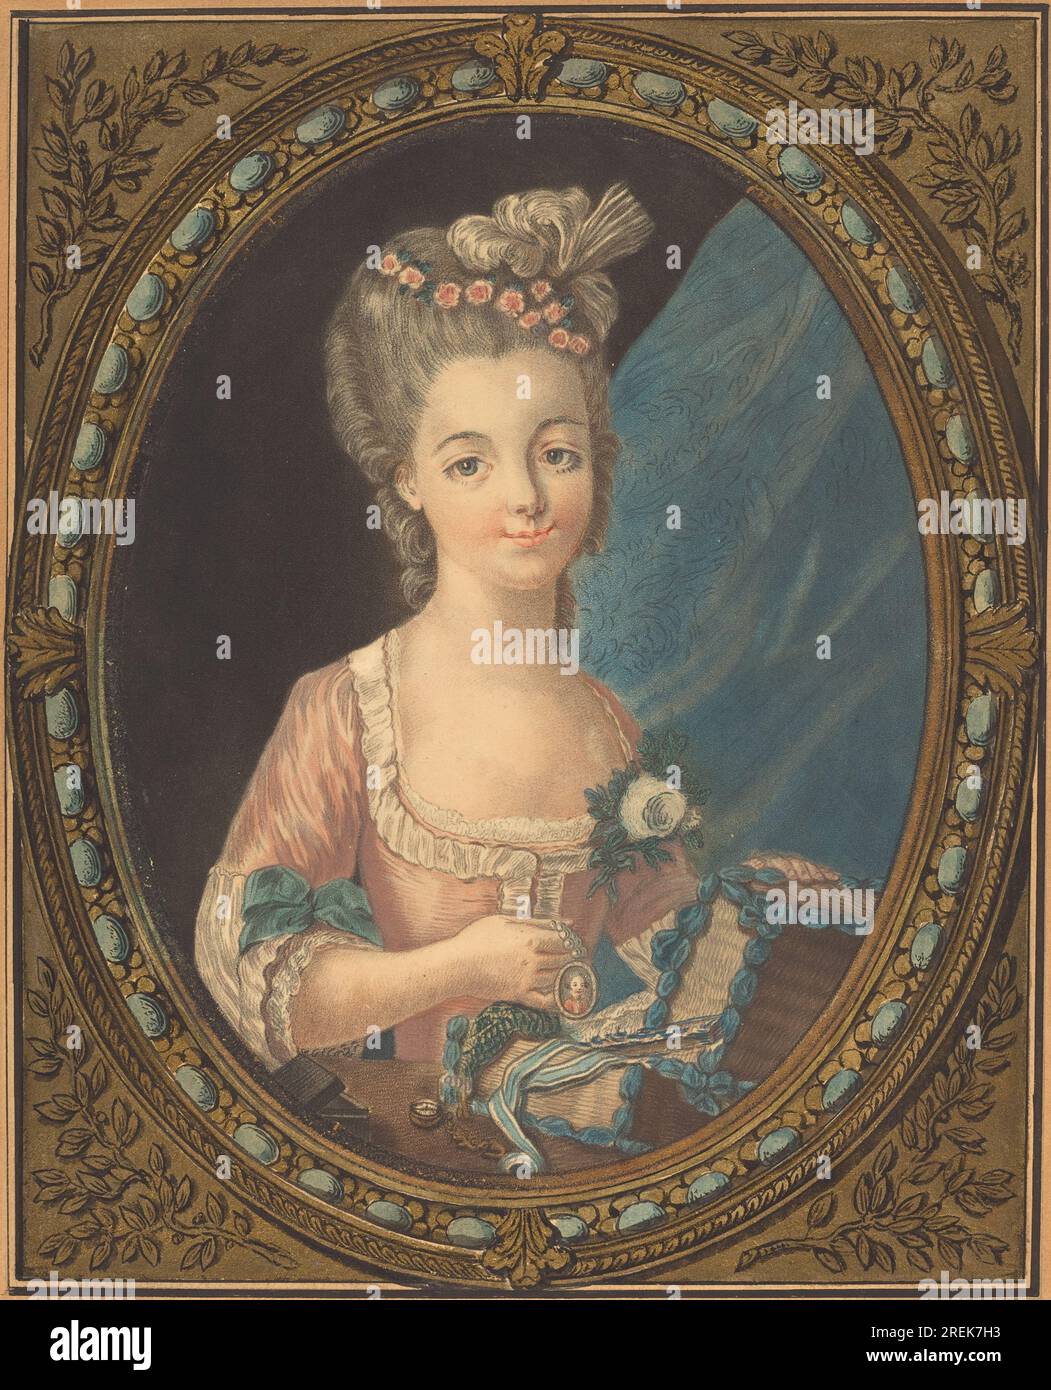 'Louis-Marin Bonnet, The Marriage Presents, 1770s, pastel manner with ornamental borders drawn in pen and black ink, watercolor, and gold flocking, sheet: 29 x 23.4 cm (11 7/16 x 9 3/16 in.), Ellwanger/Mescha Collection, 2003.150.11' Stock Photo